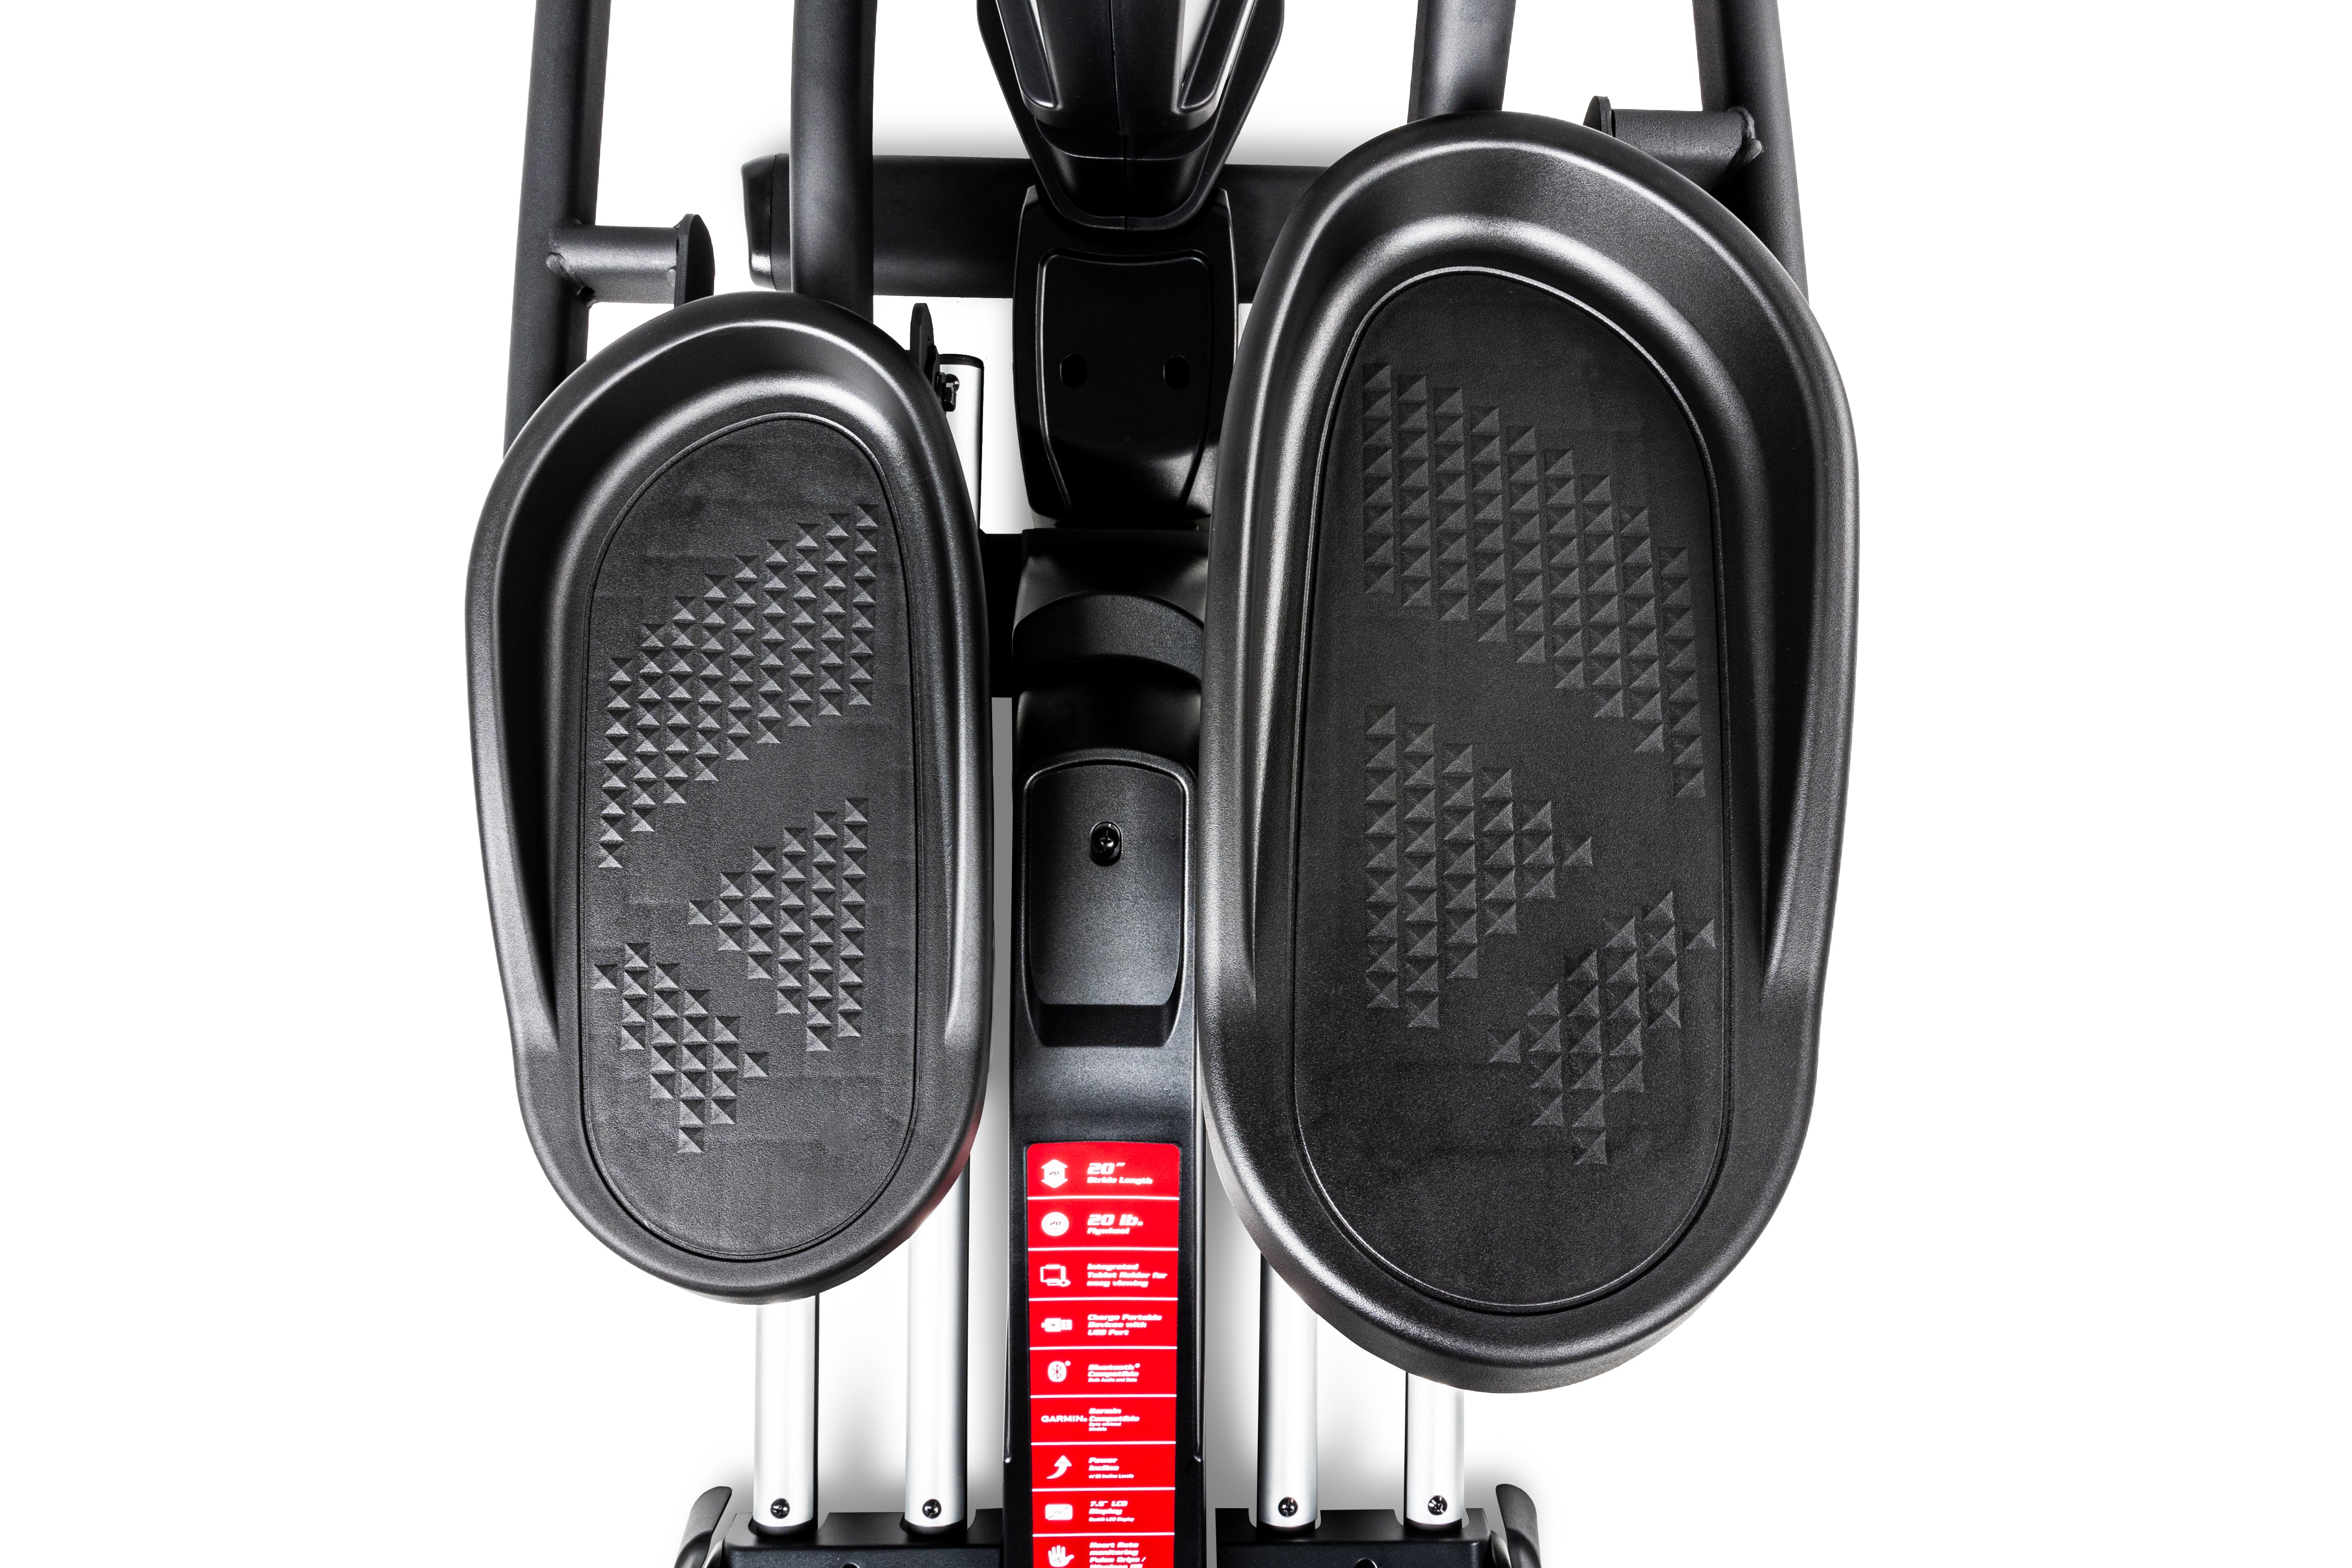 Top-down view of the Sole E25 elliptical trainer showcasing its textured foot pedals, central column, and a red labeled resistance adjustment strip.